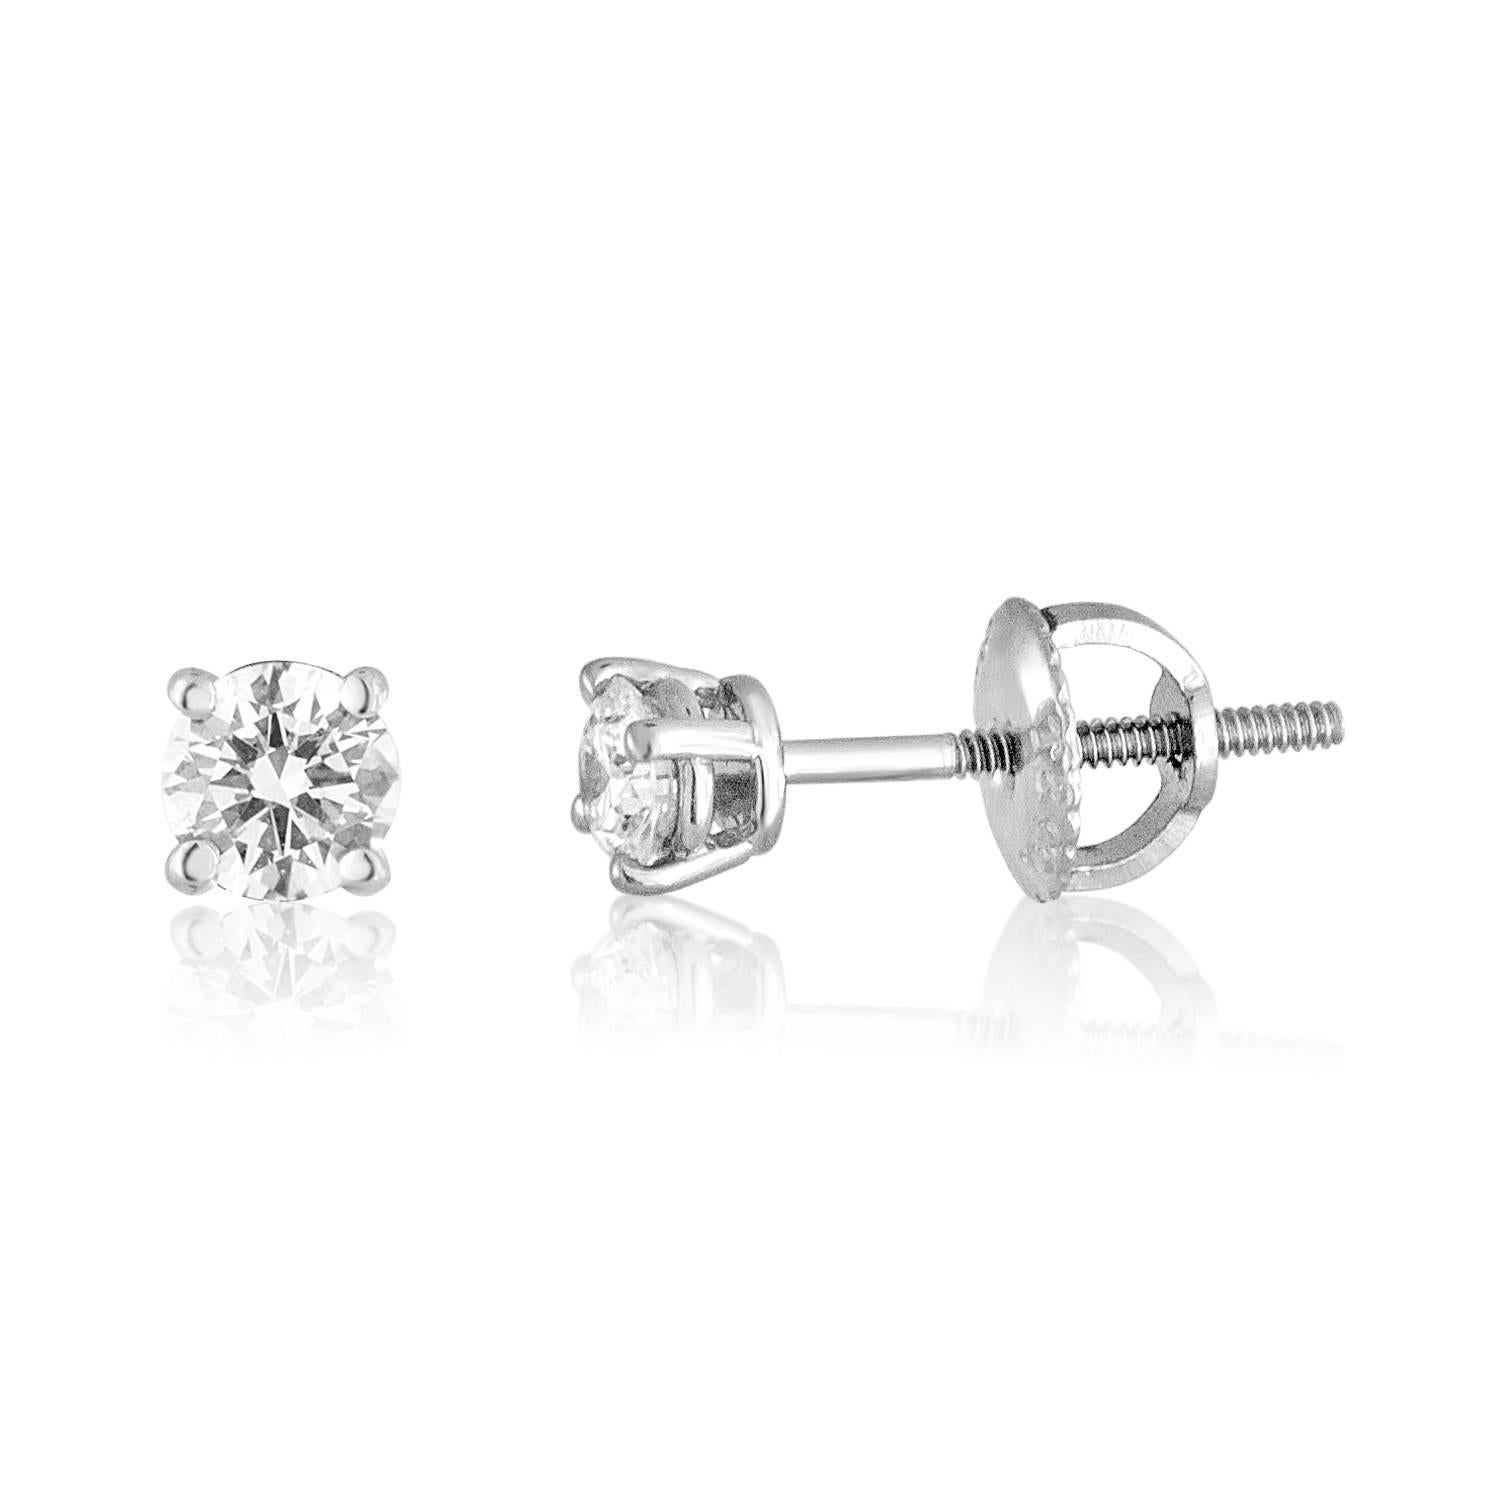 Tiffany & Co. Diamond Stud Earrings
The studs are Platinum 950
The studs are 0.38 Carats in total.
Each diamond is approximately 0.19 Carats G/H IF/VVS1
The studs are screw backs.
The studs weigh 1.4 grams.
The earrings come with an IGI Certificate.